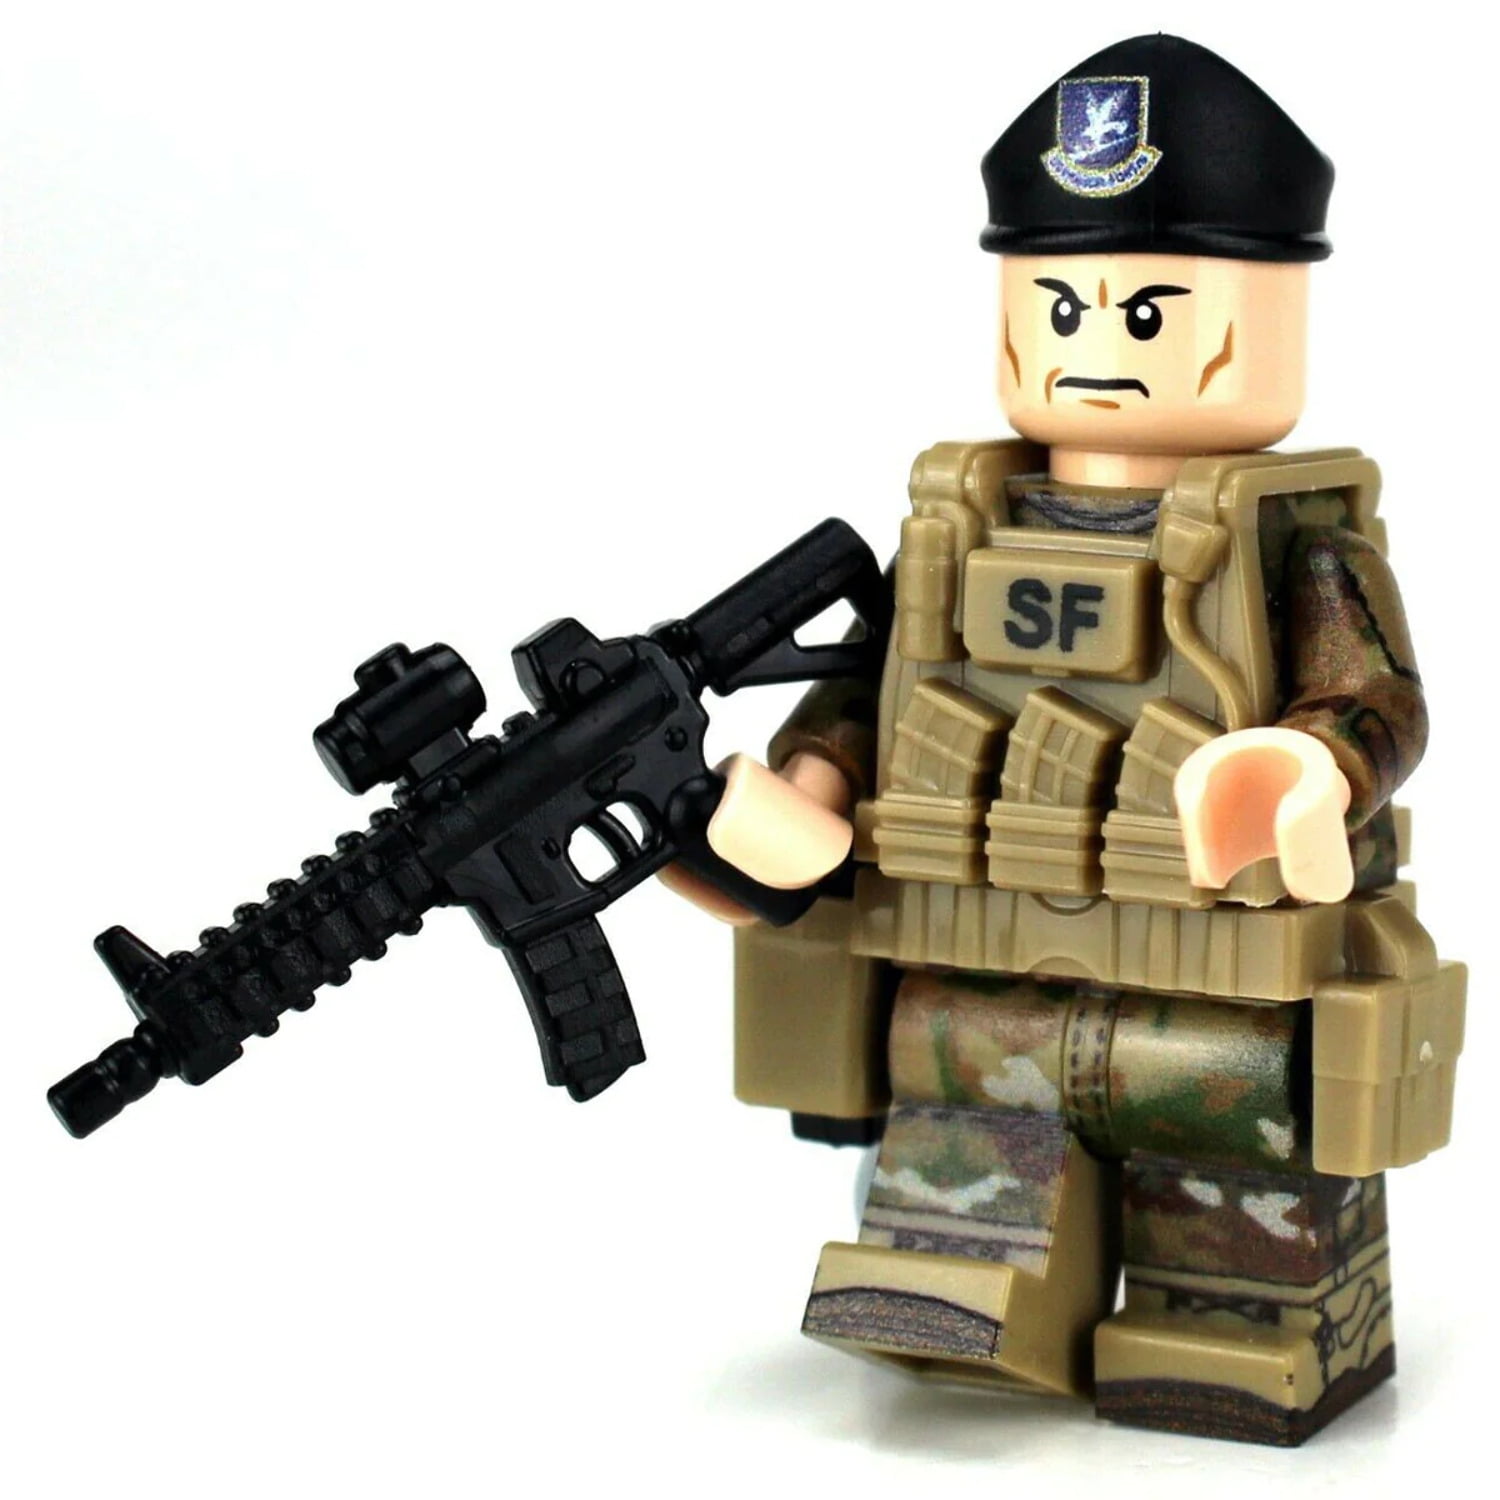 Toy Brick Air Force Security Forces Airmen OCP Minifig Soldier made ...